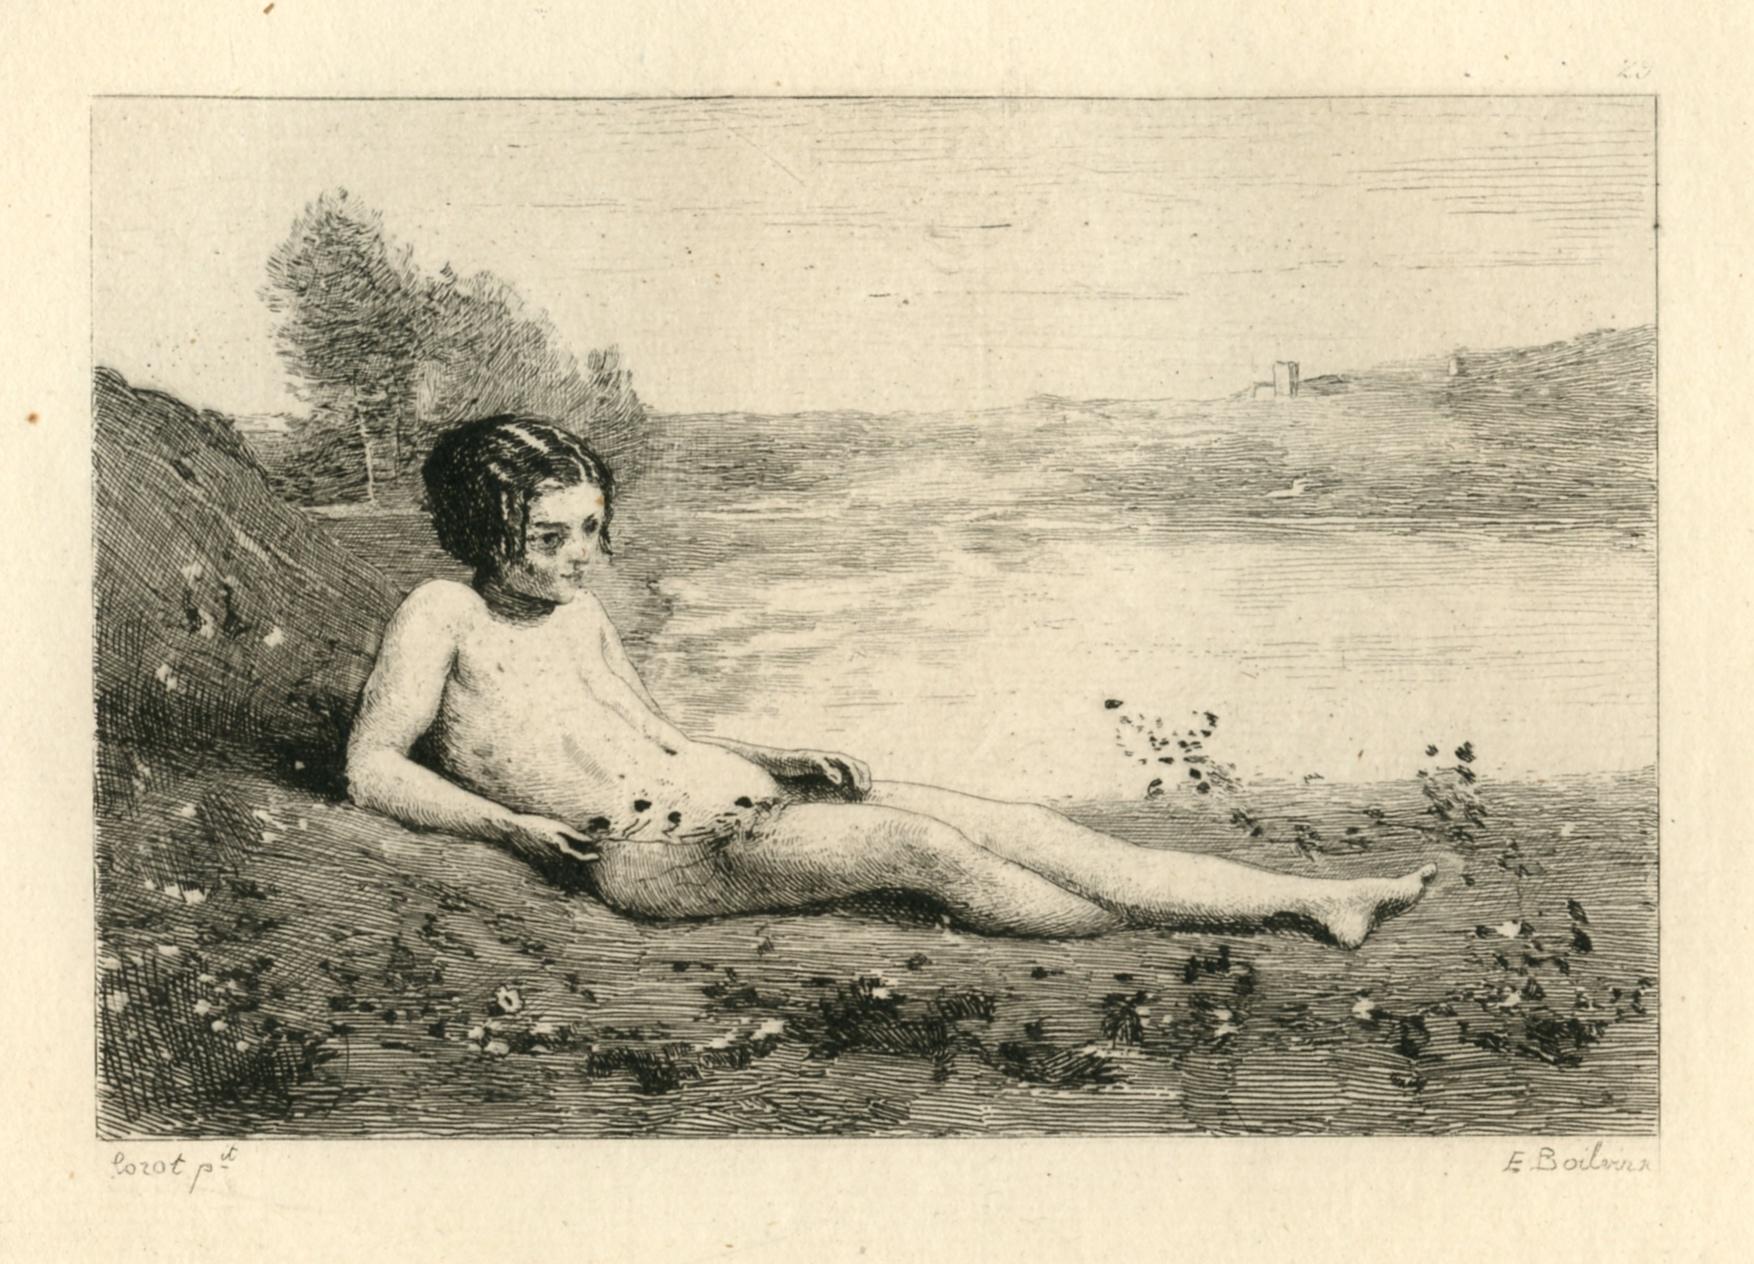 "Jeune baigneuse couchee sur l'herbe" etching - Print by (after) Jean-Baptiste-Camille Corot